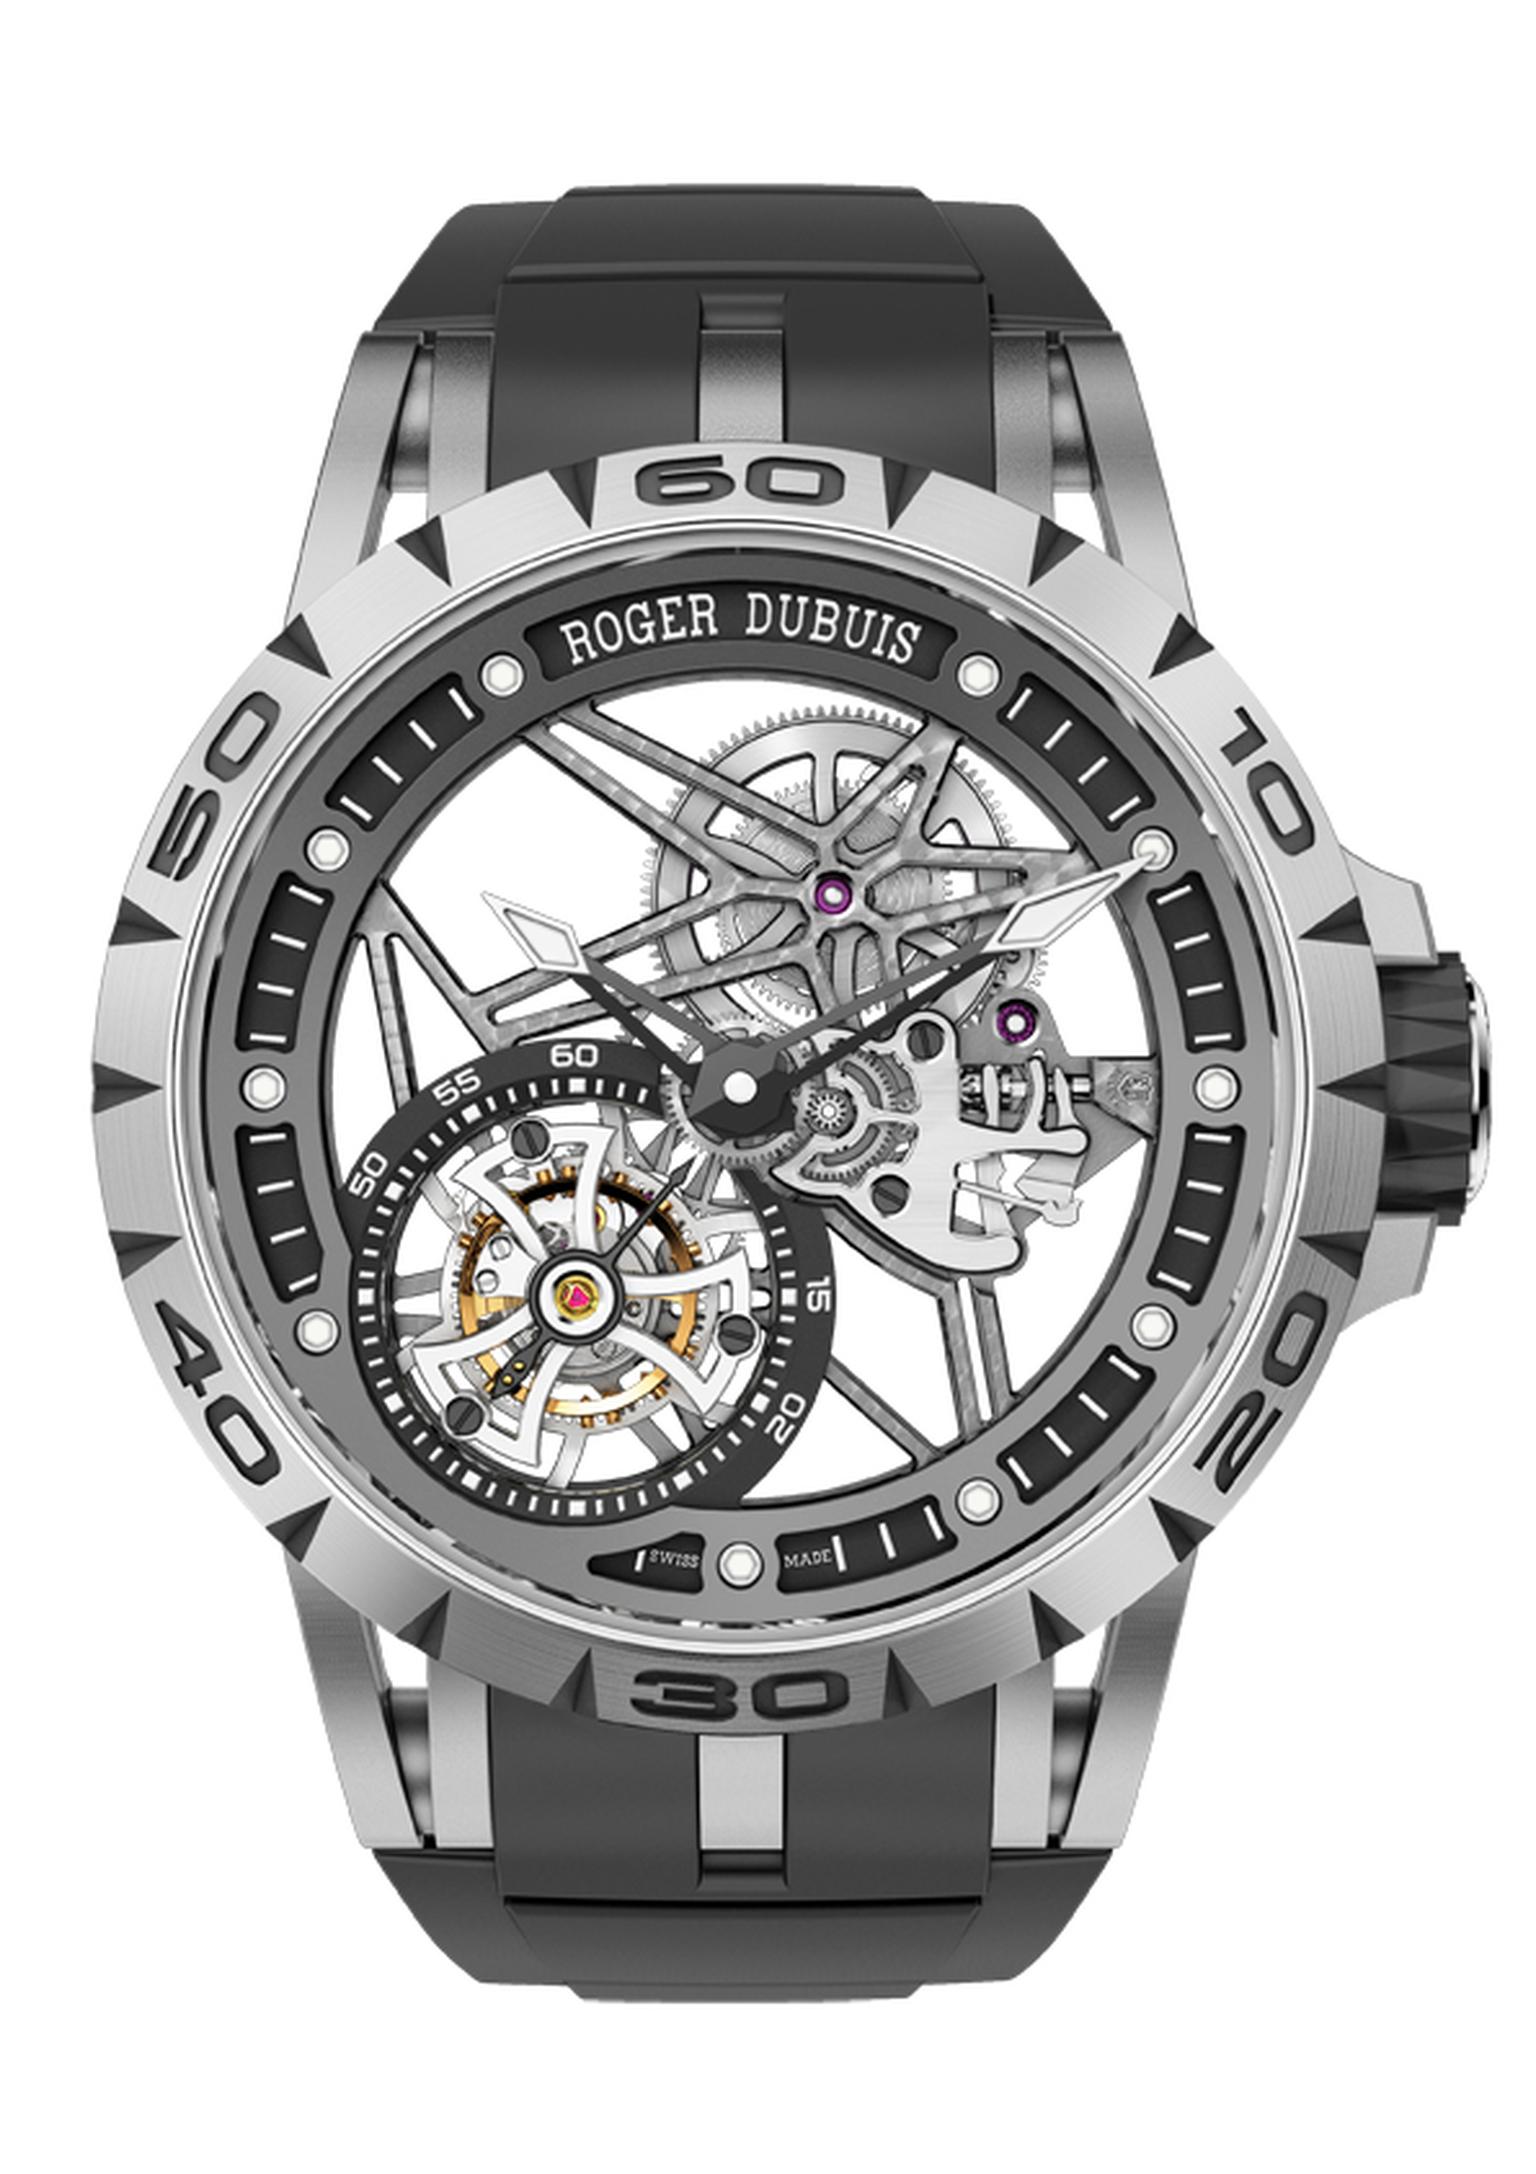 Roger Dubuis Excalibur Spider Skeleton Flying Tourbillon takes skeleton watches one step beyond the movement and extends its spidery web to just about everything skeletonisable on the watch: the case, the flange, the hands and the lugs.